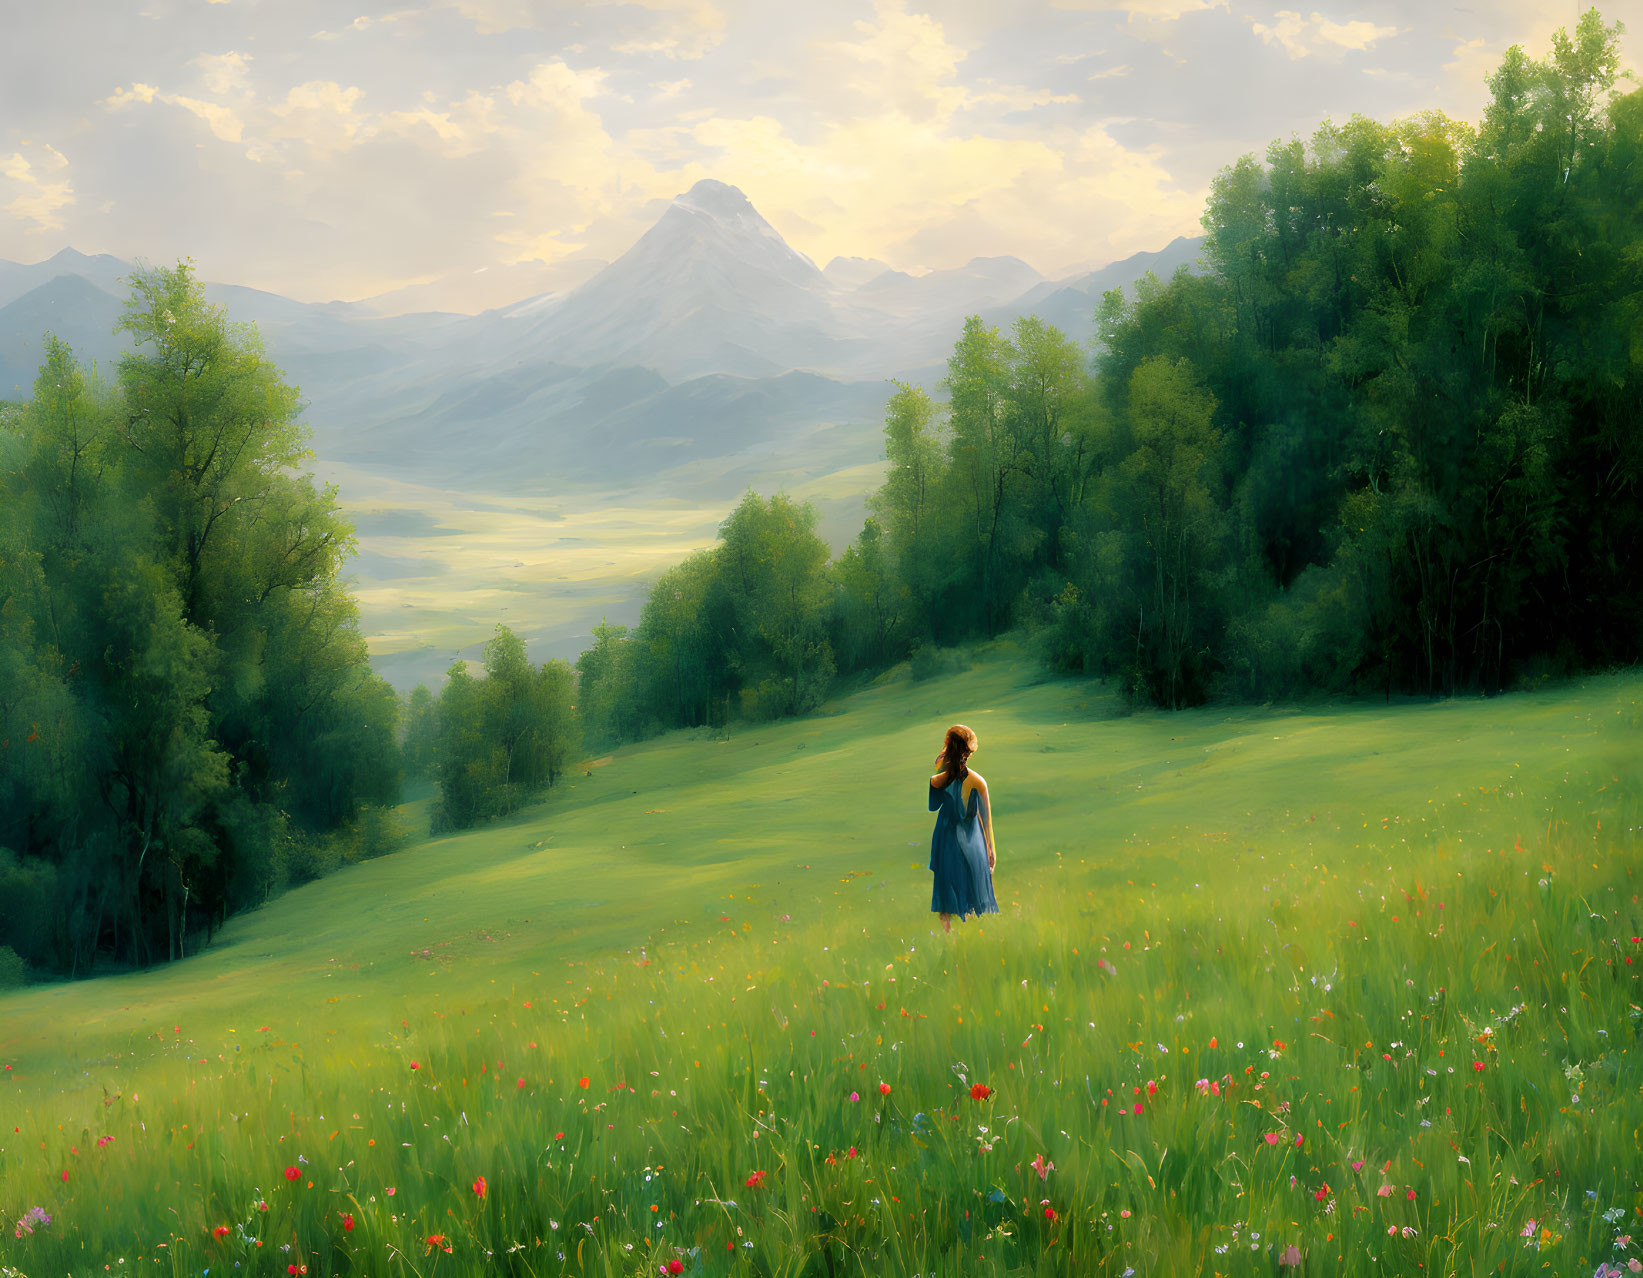 Snow-Capped Mountain, Forest, Woman in Blue Dress, Blooming Meadow